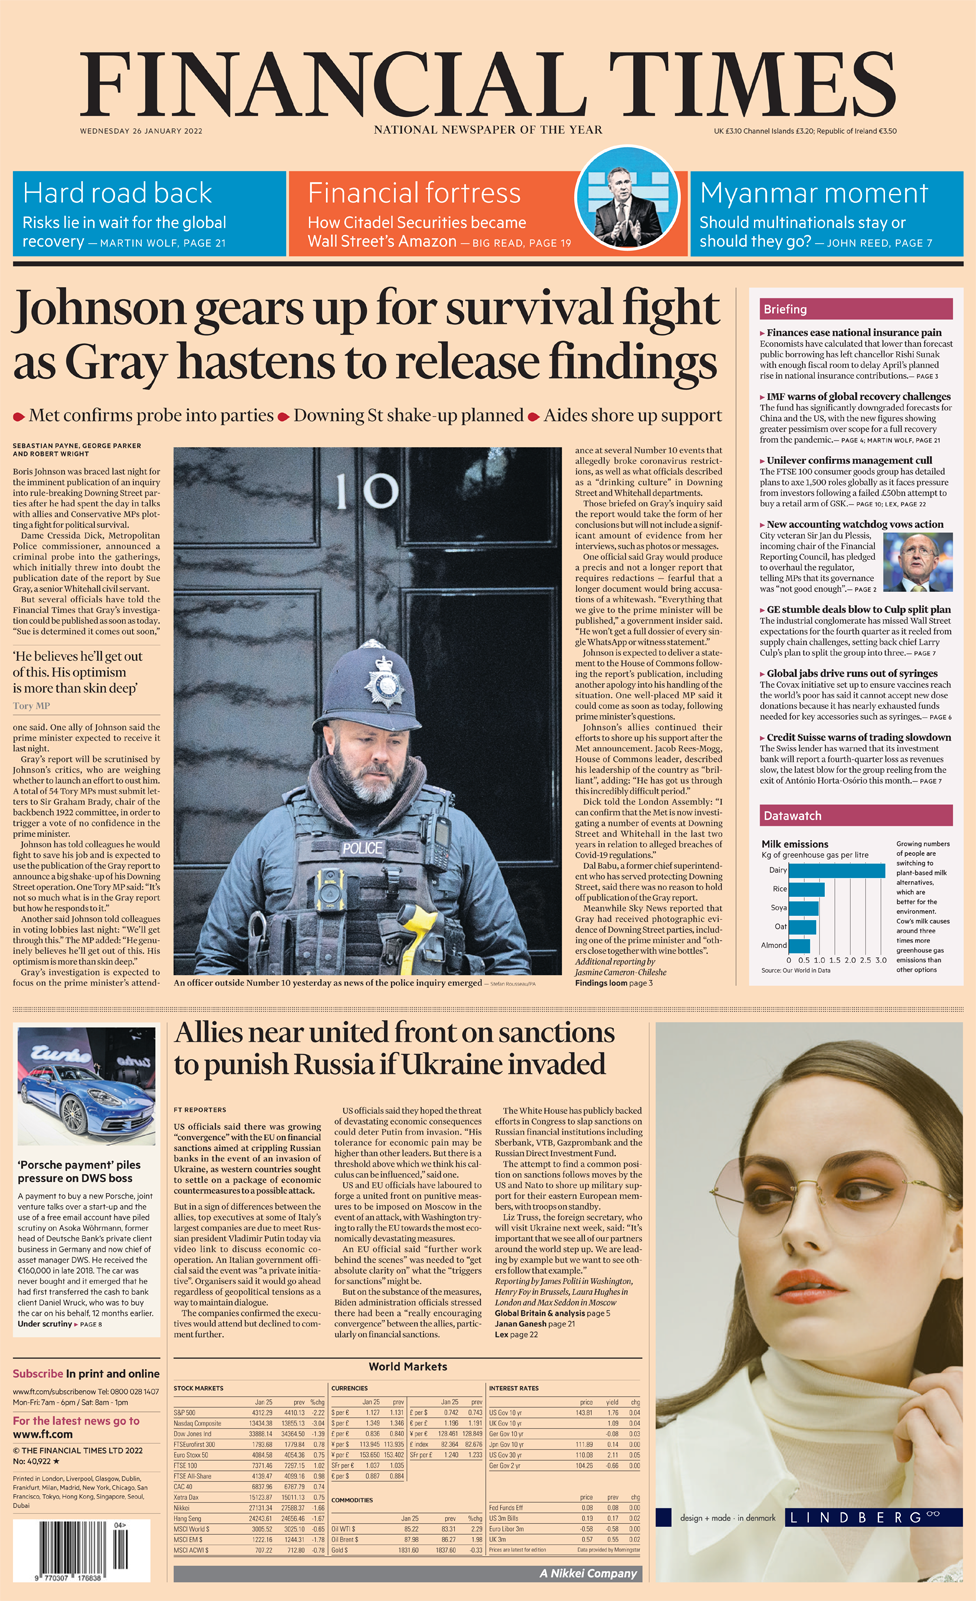 How is the Tory government doing? - Page 25 _123004849_financialtimes-nc